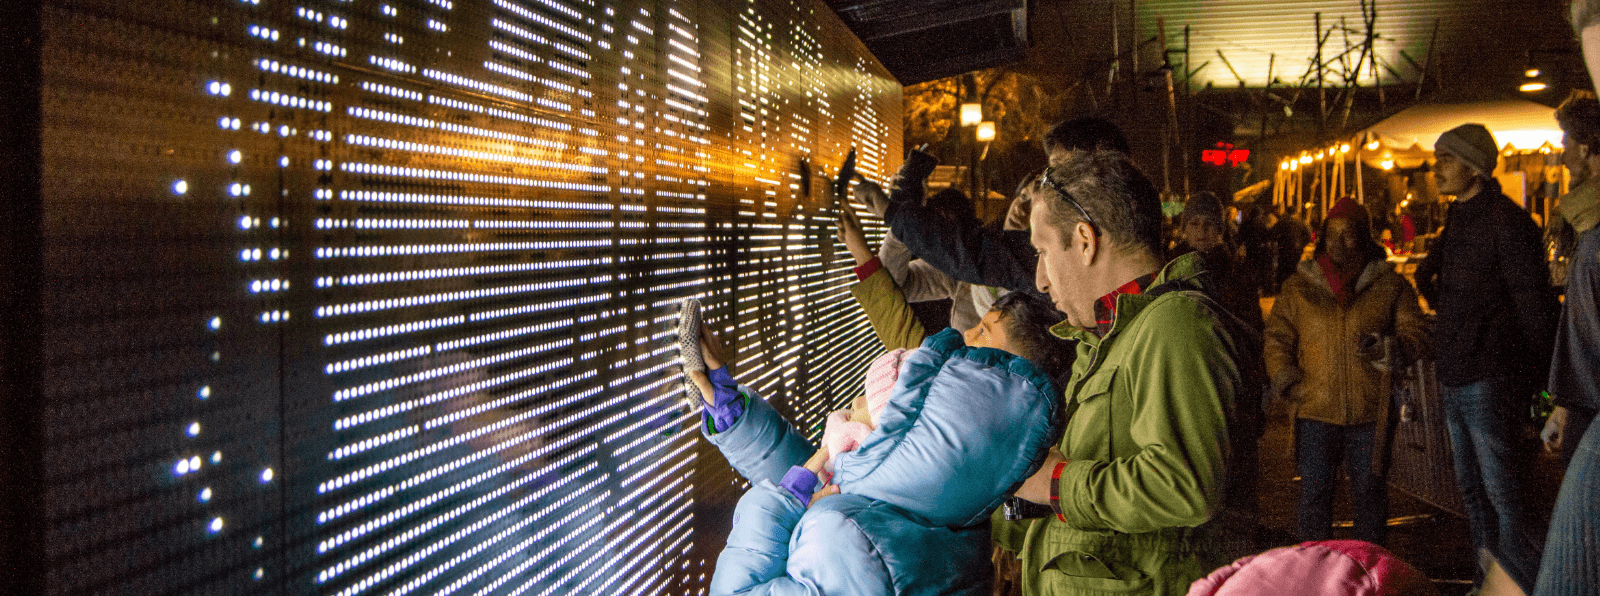 A group of people interacting with an outdoor light installation